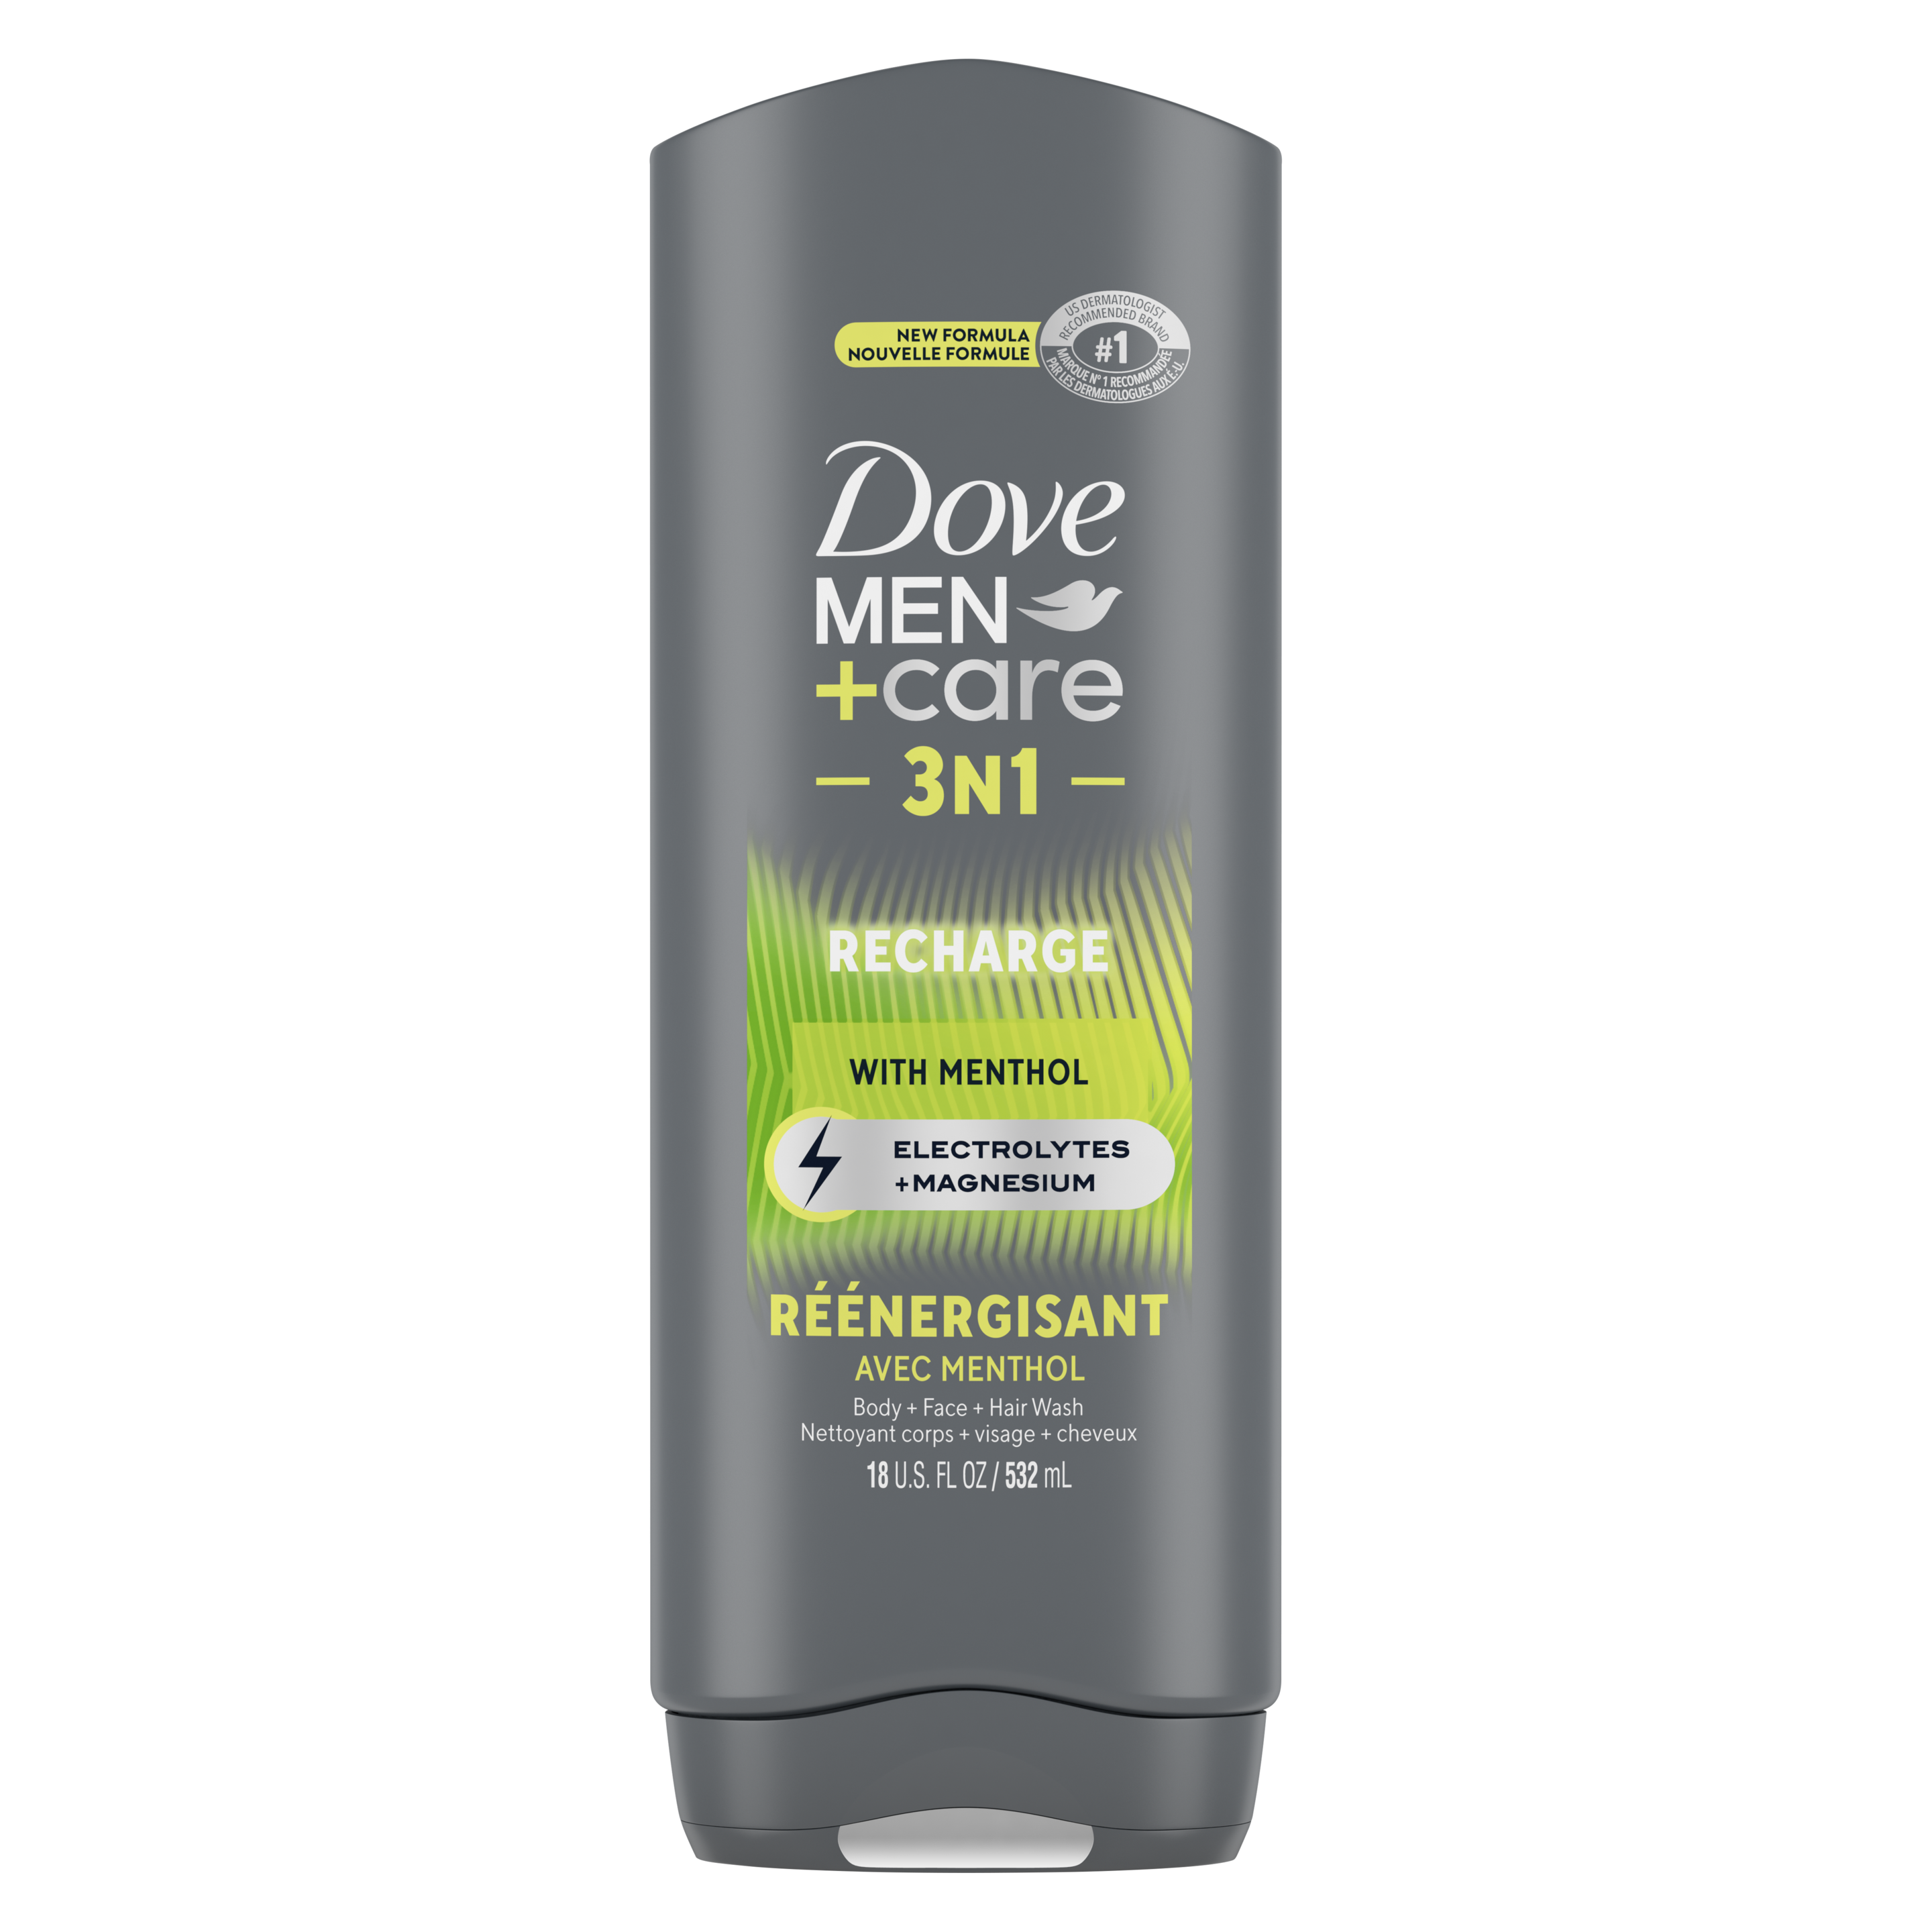 Dove Men+Care 3N1 Recharge With Menthol Body Wash